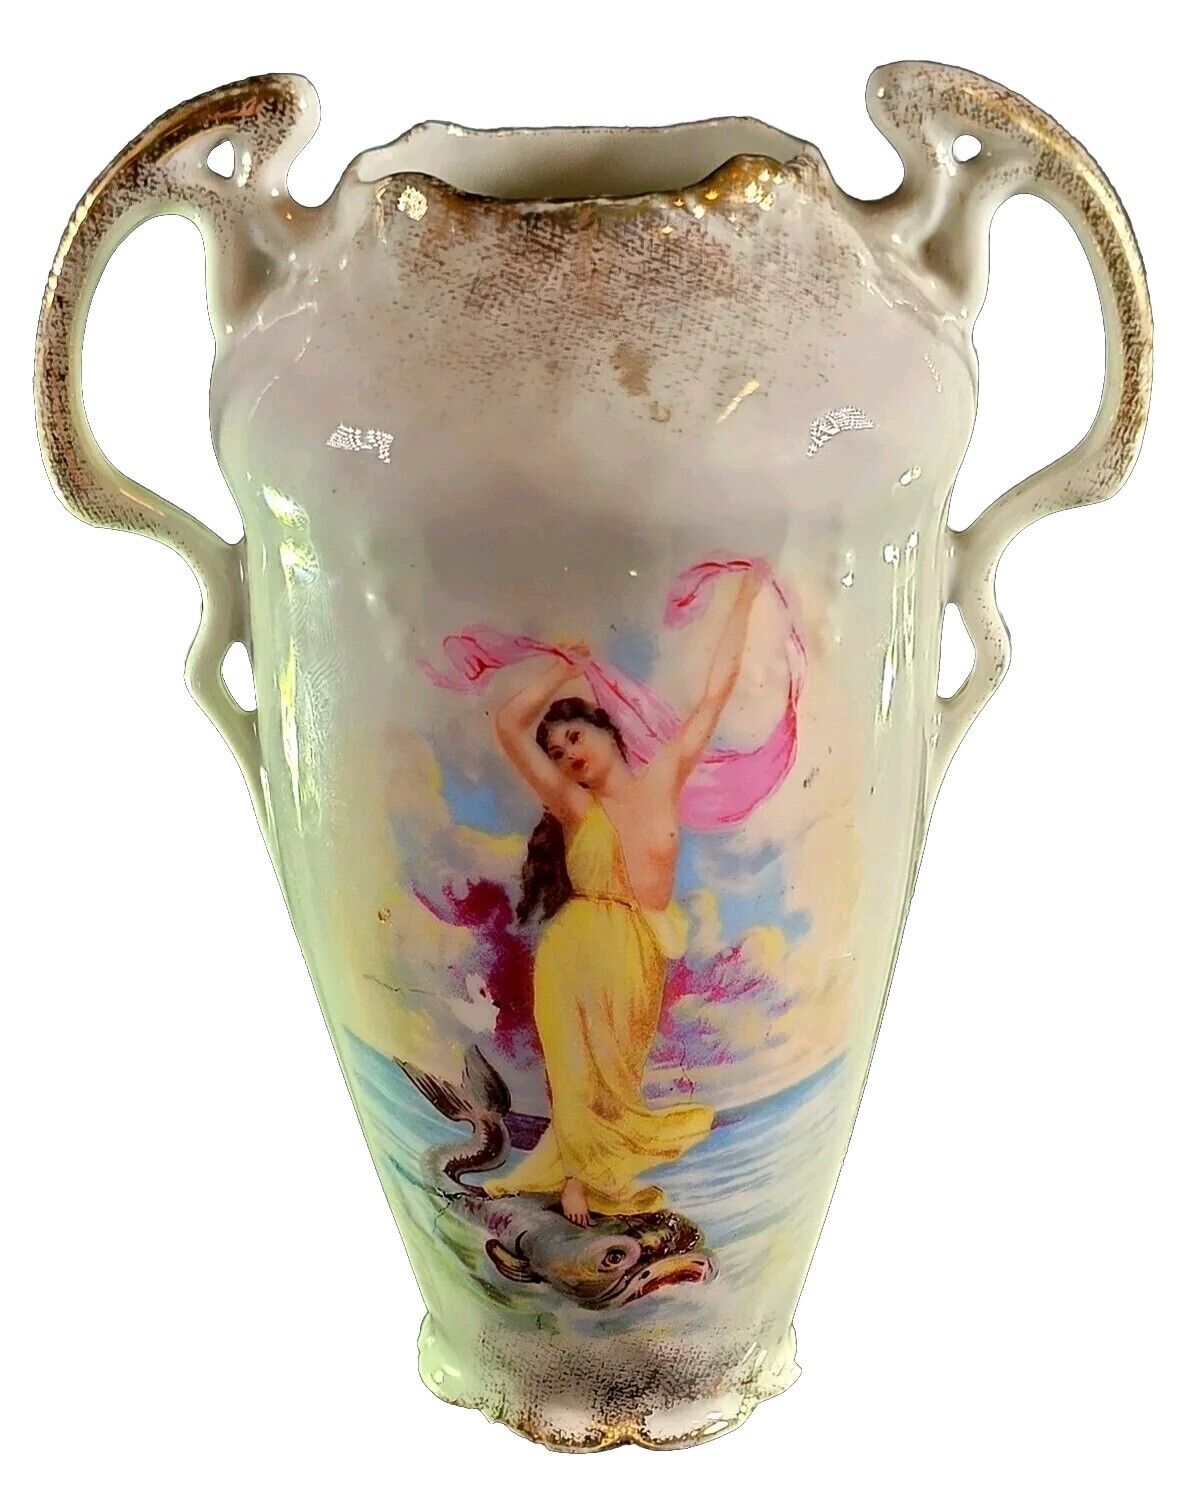 Lovely Antique Victorian Small Flower Vase Of Aphrodite Riding/ Standing On Fish